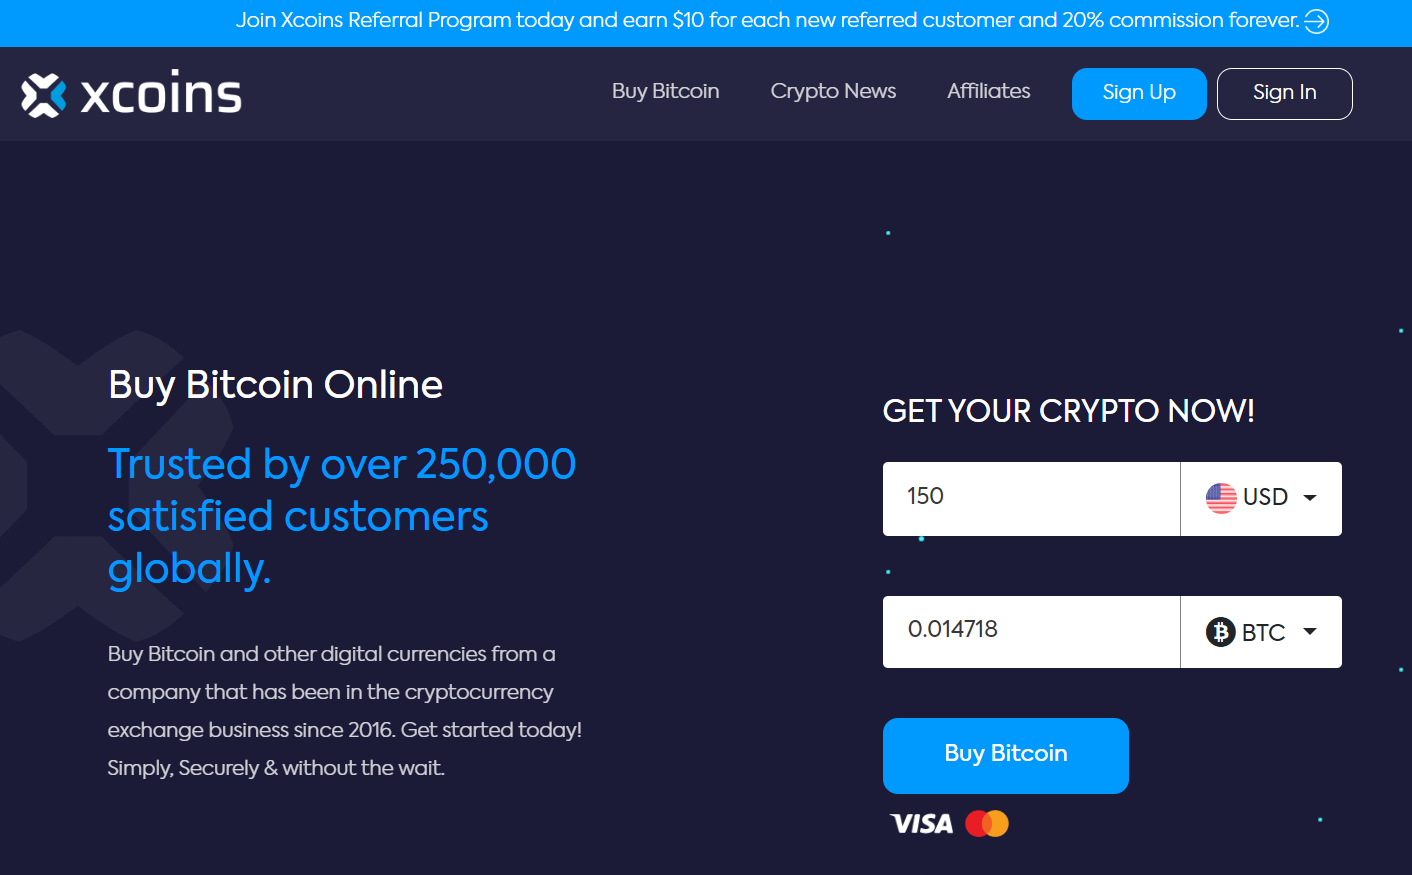 Buy Crypto With Debit Card No Verification - How To Buy ...